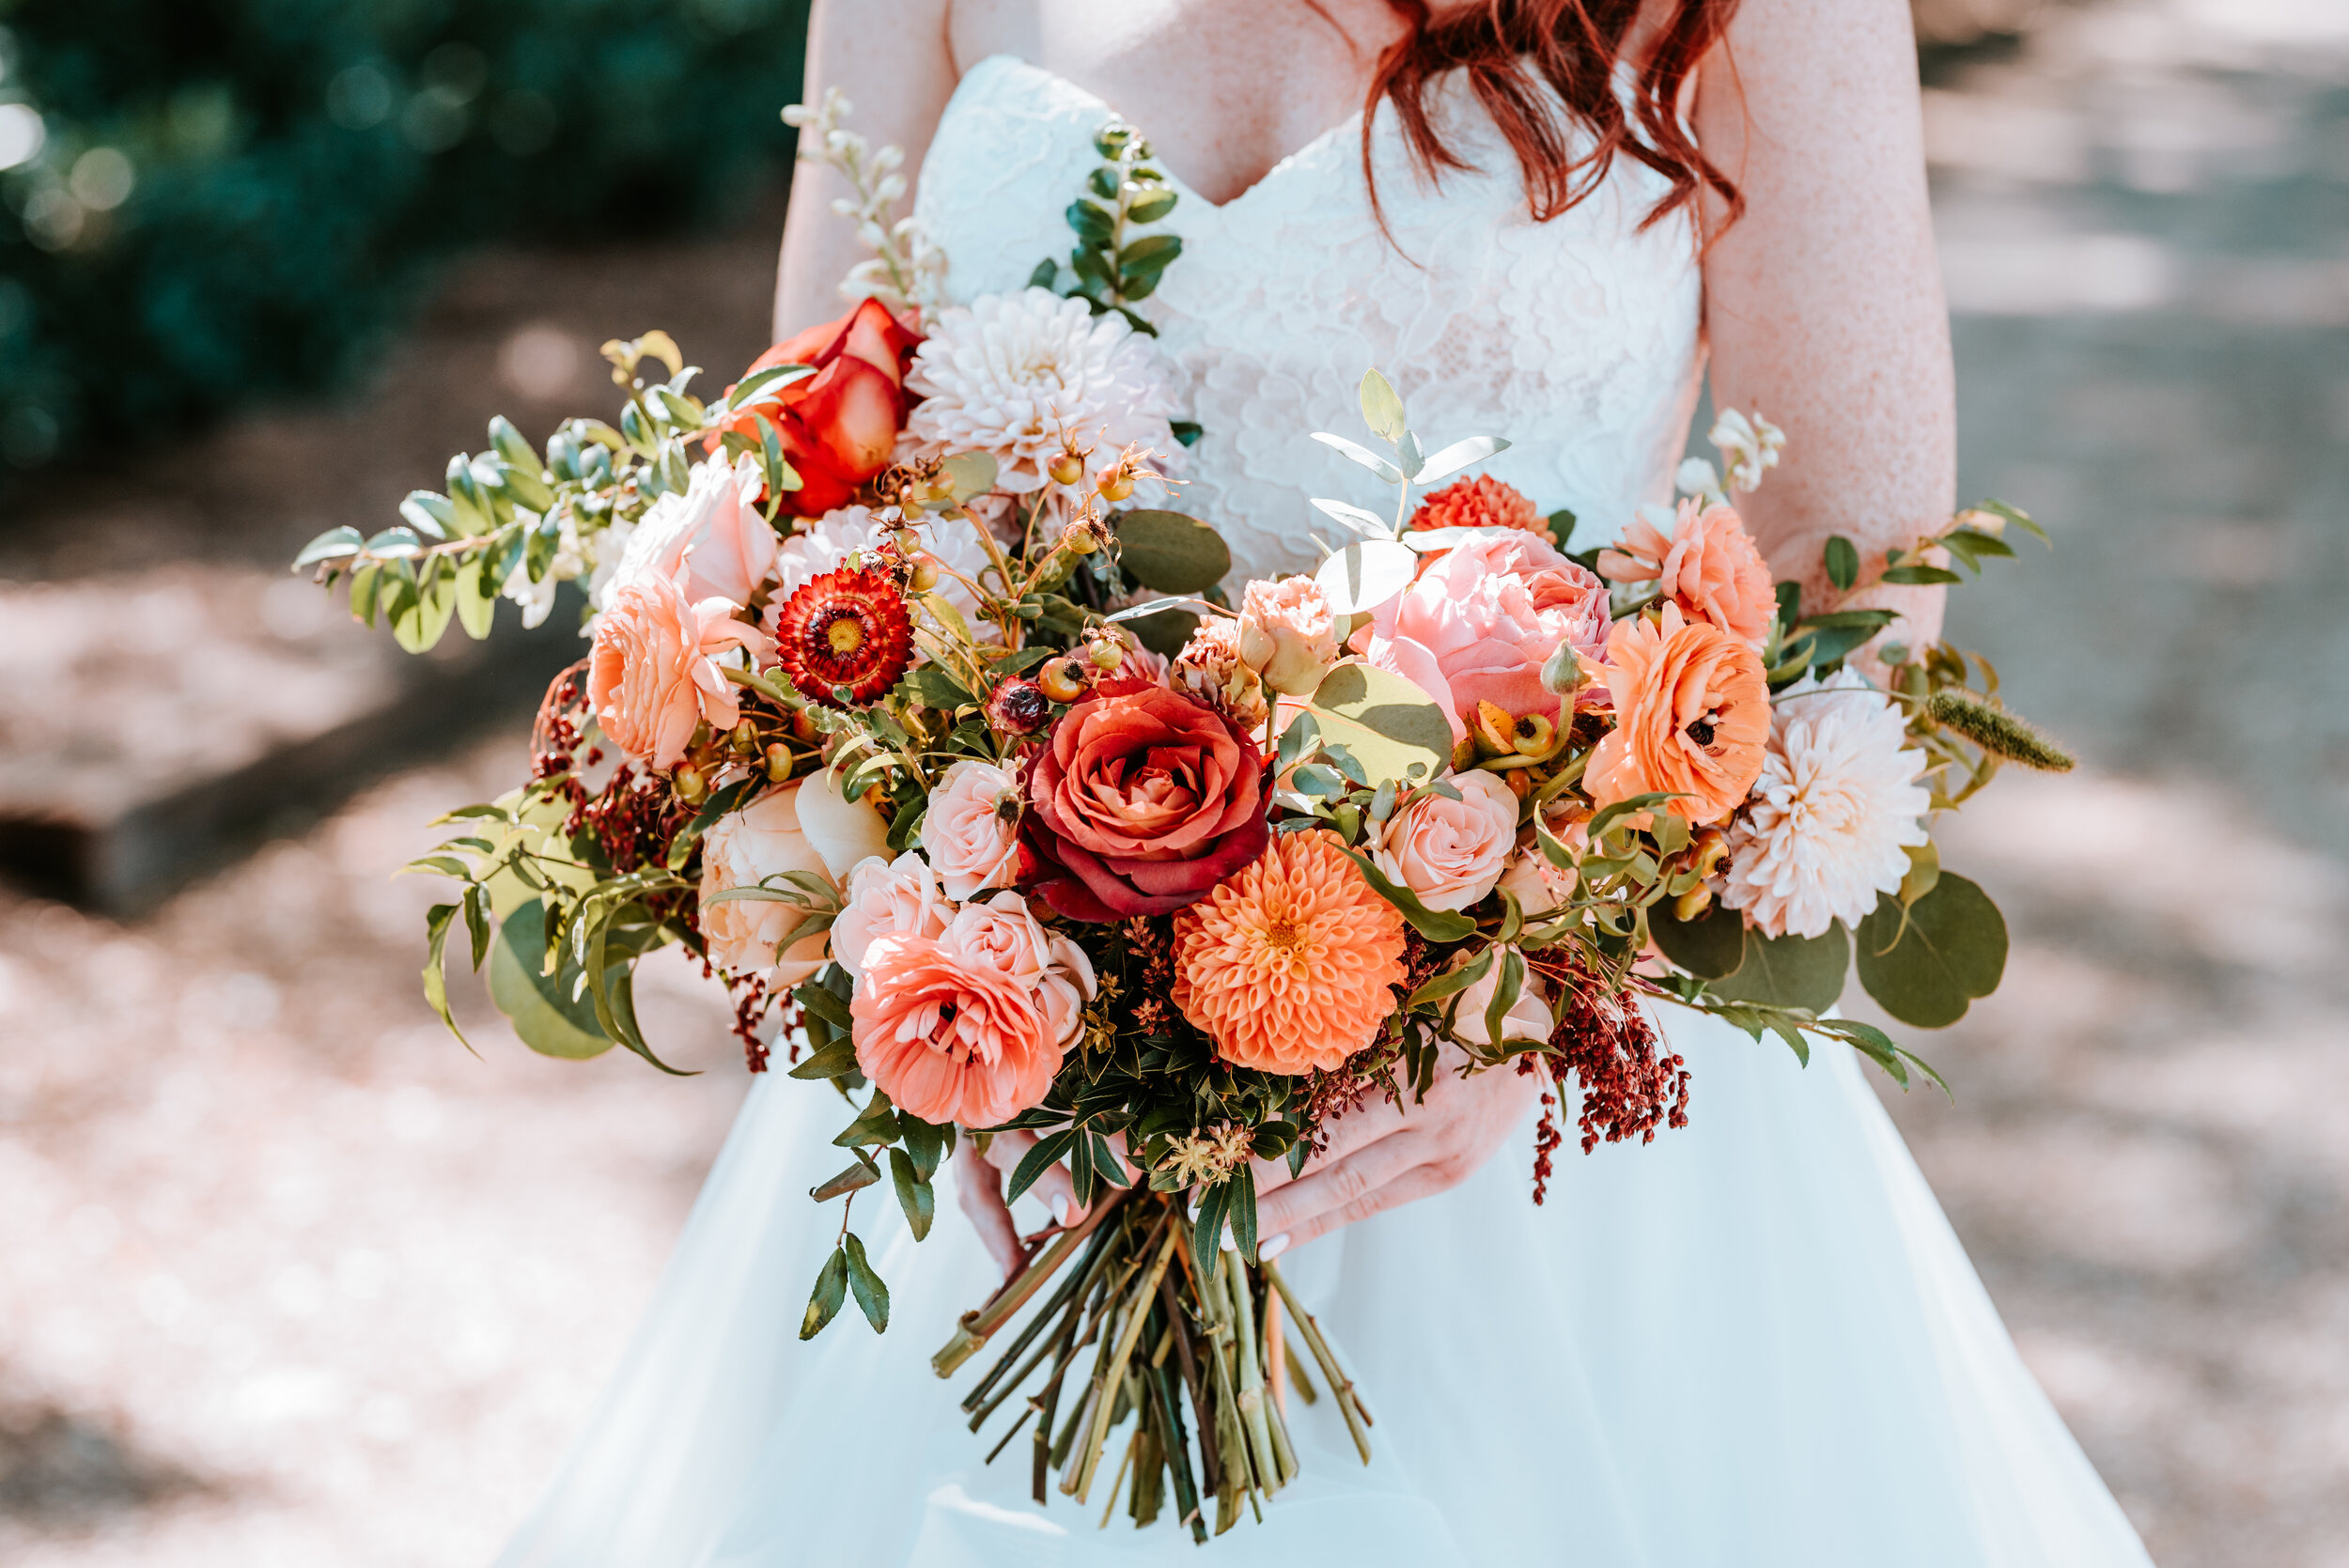 Fall bridal bouquet with garden roses, dahlias, and ranunculus in shades of burnt orange and peach, autumnal berries, and lush greenery. Nashville Wedding Floral Design.